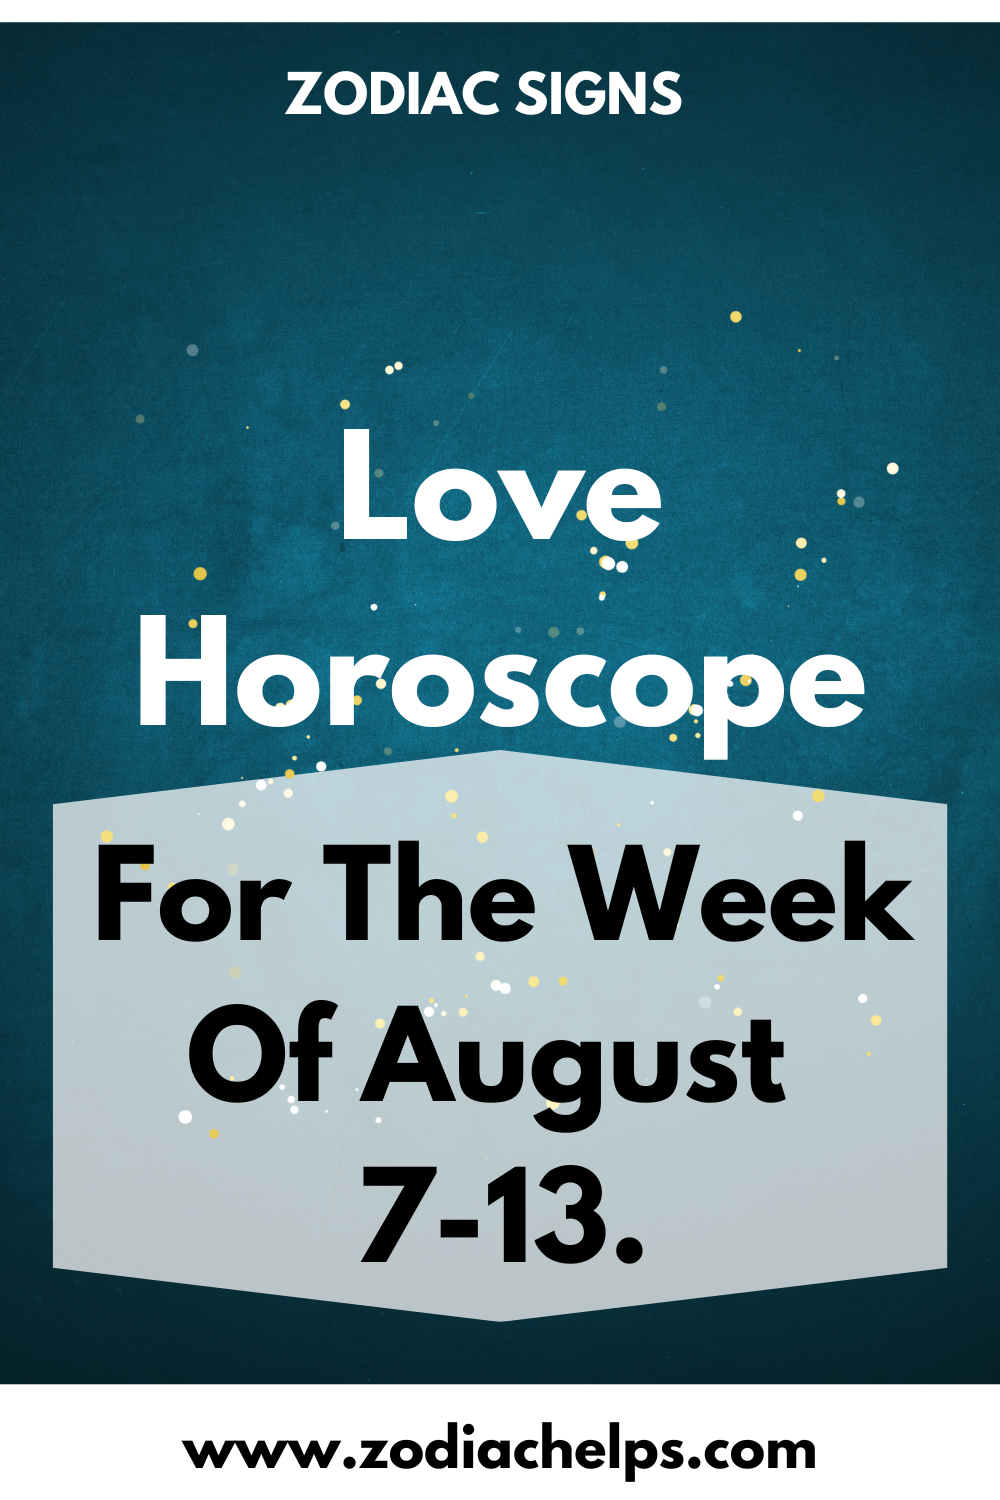 Love Horoscope For The Week Of August 7-13.